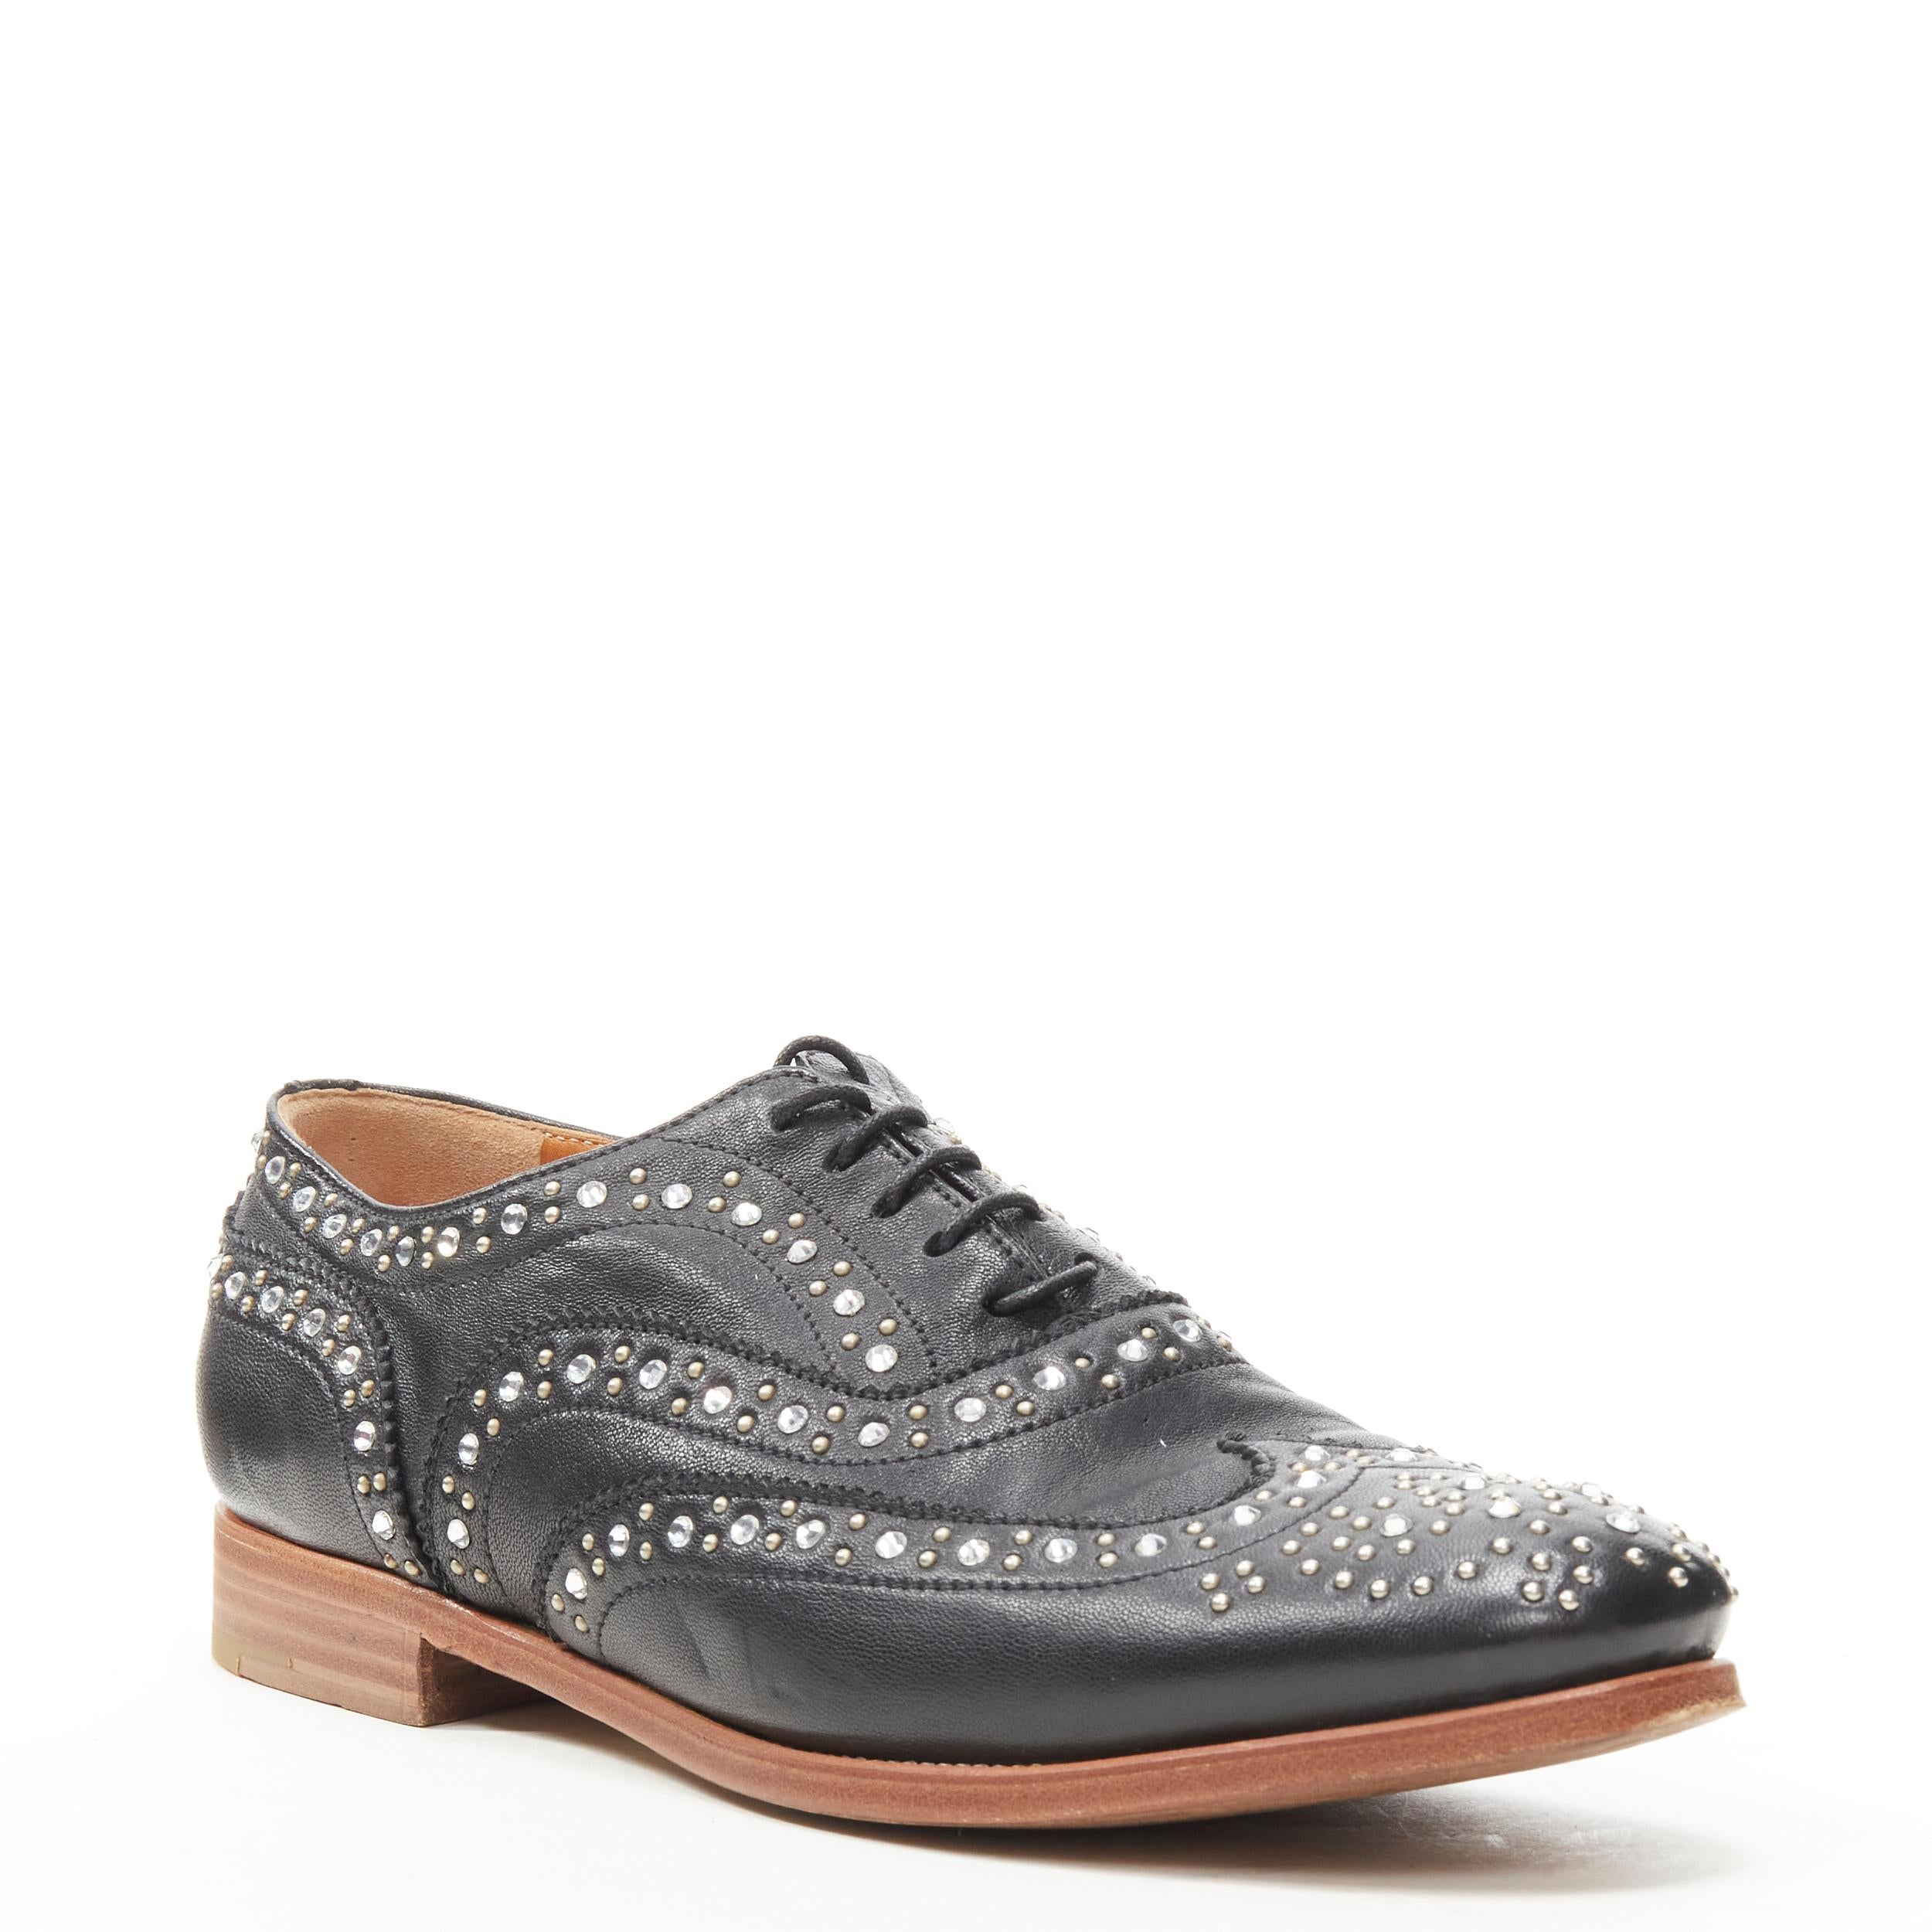 CHURCH'S Burwood black leather crystal diamante oxford brogues EU36.5 
Reference: LNKO/A01926 
Brand: Church's 
Model: Burwood 
Material: Leather 
Color: Black 
Pattern: Solid 
Closure: Lace 
Extra Detail: DiamantâˆšÂ© stud embellishment. Leather